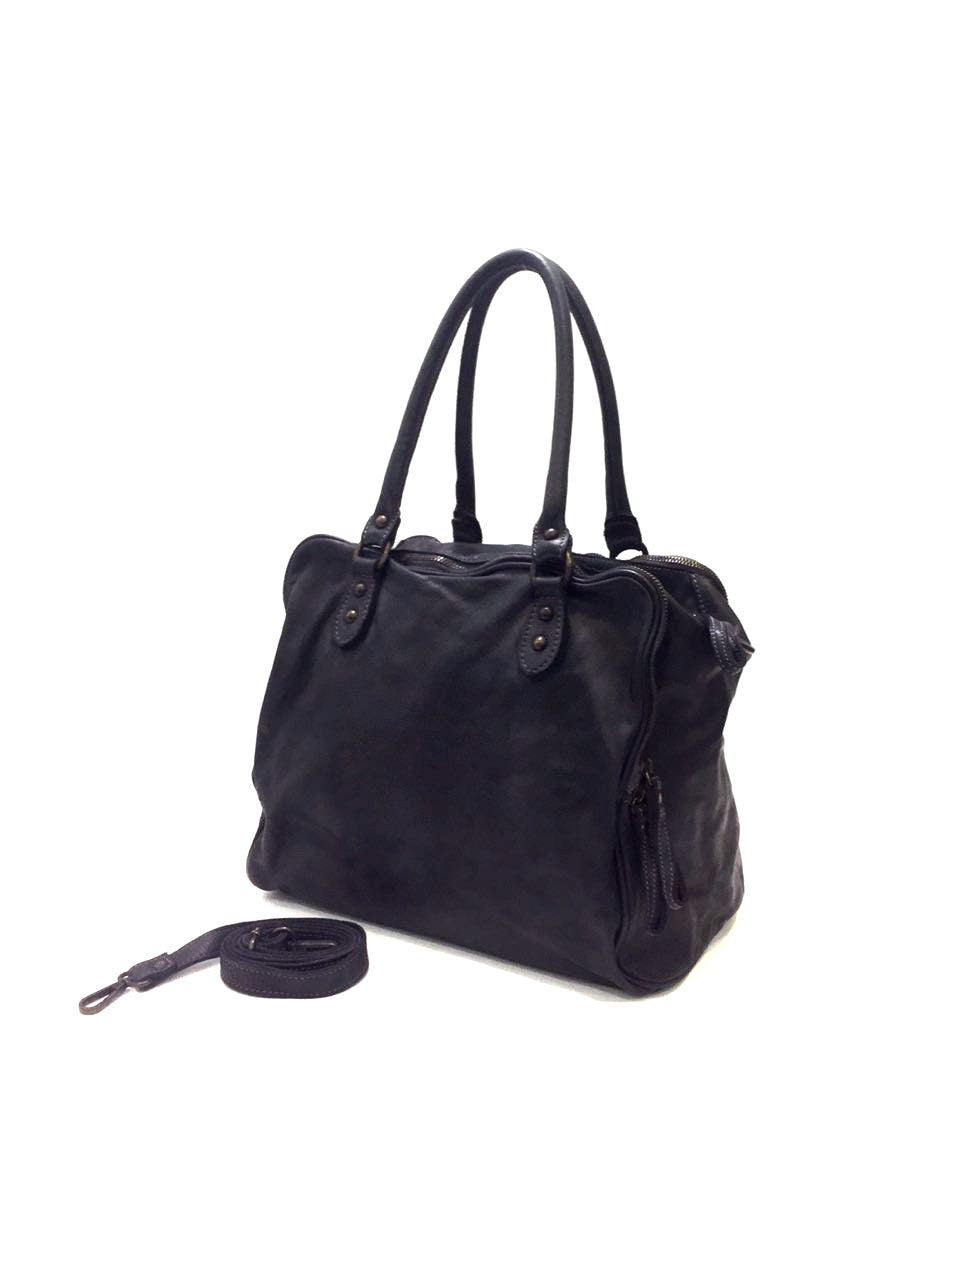 KASIA - Leather Bag - SOLD OUT